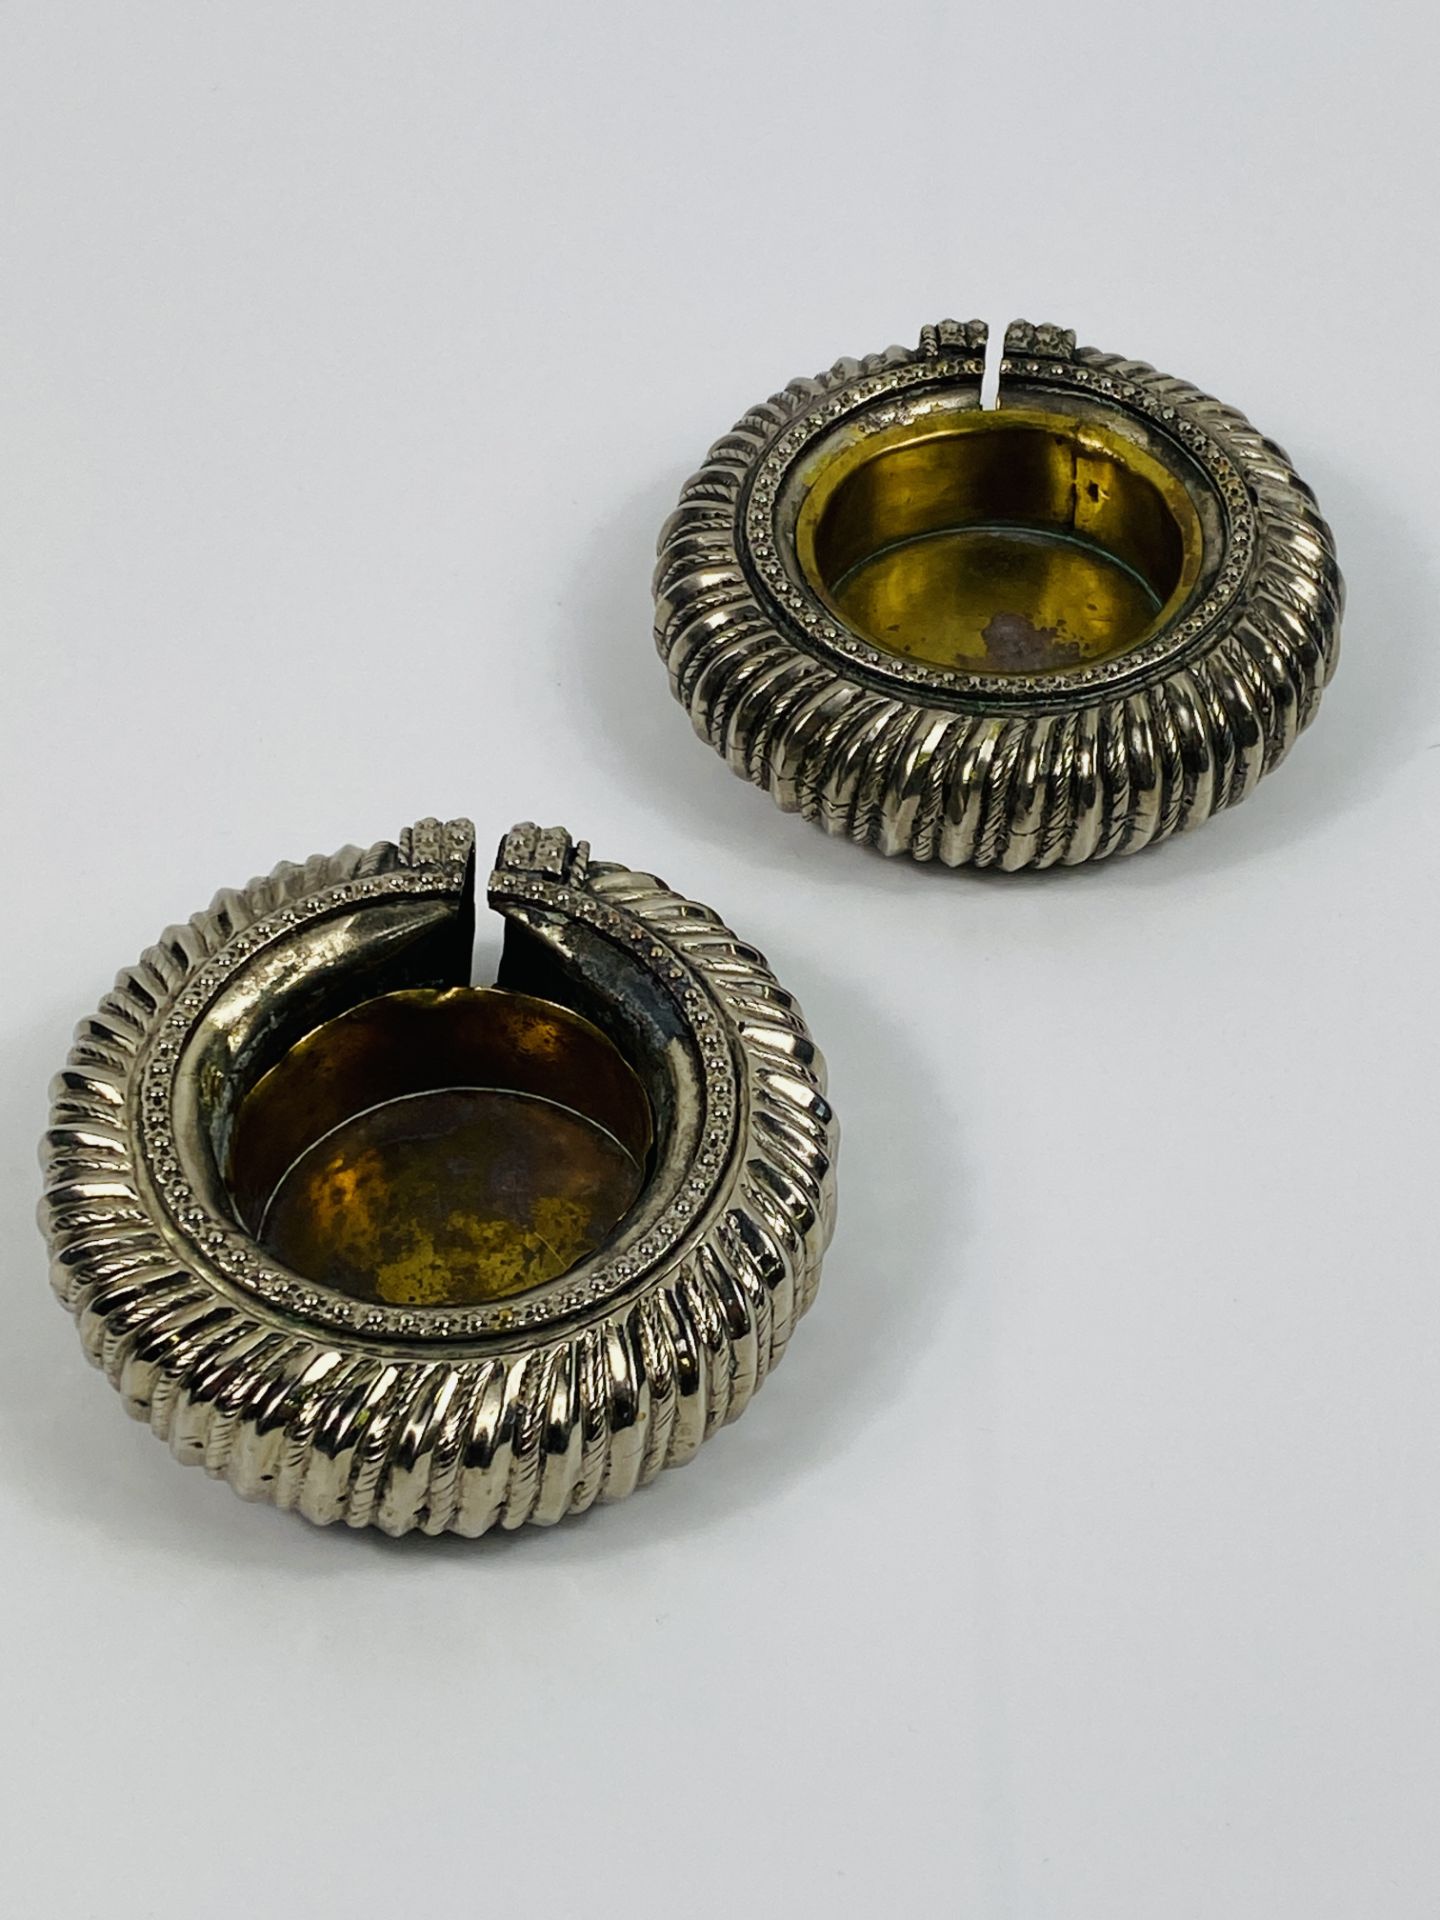 Pair of white metal ankle bangles with brass inserts - Image 4 of 7